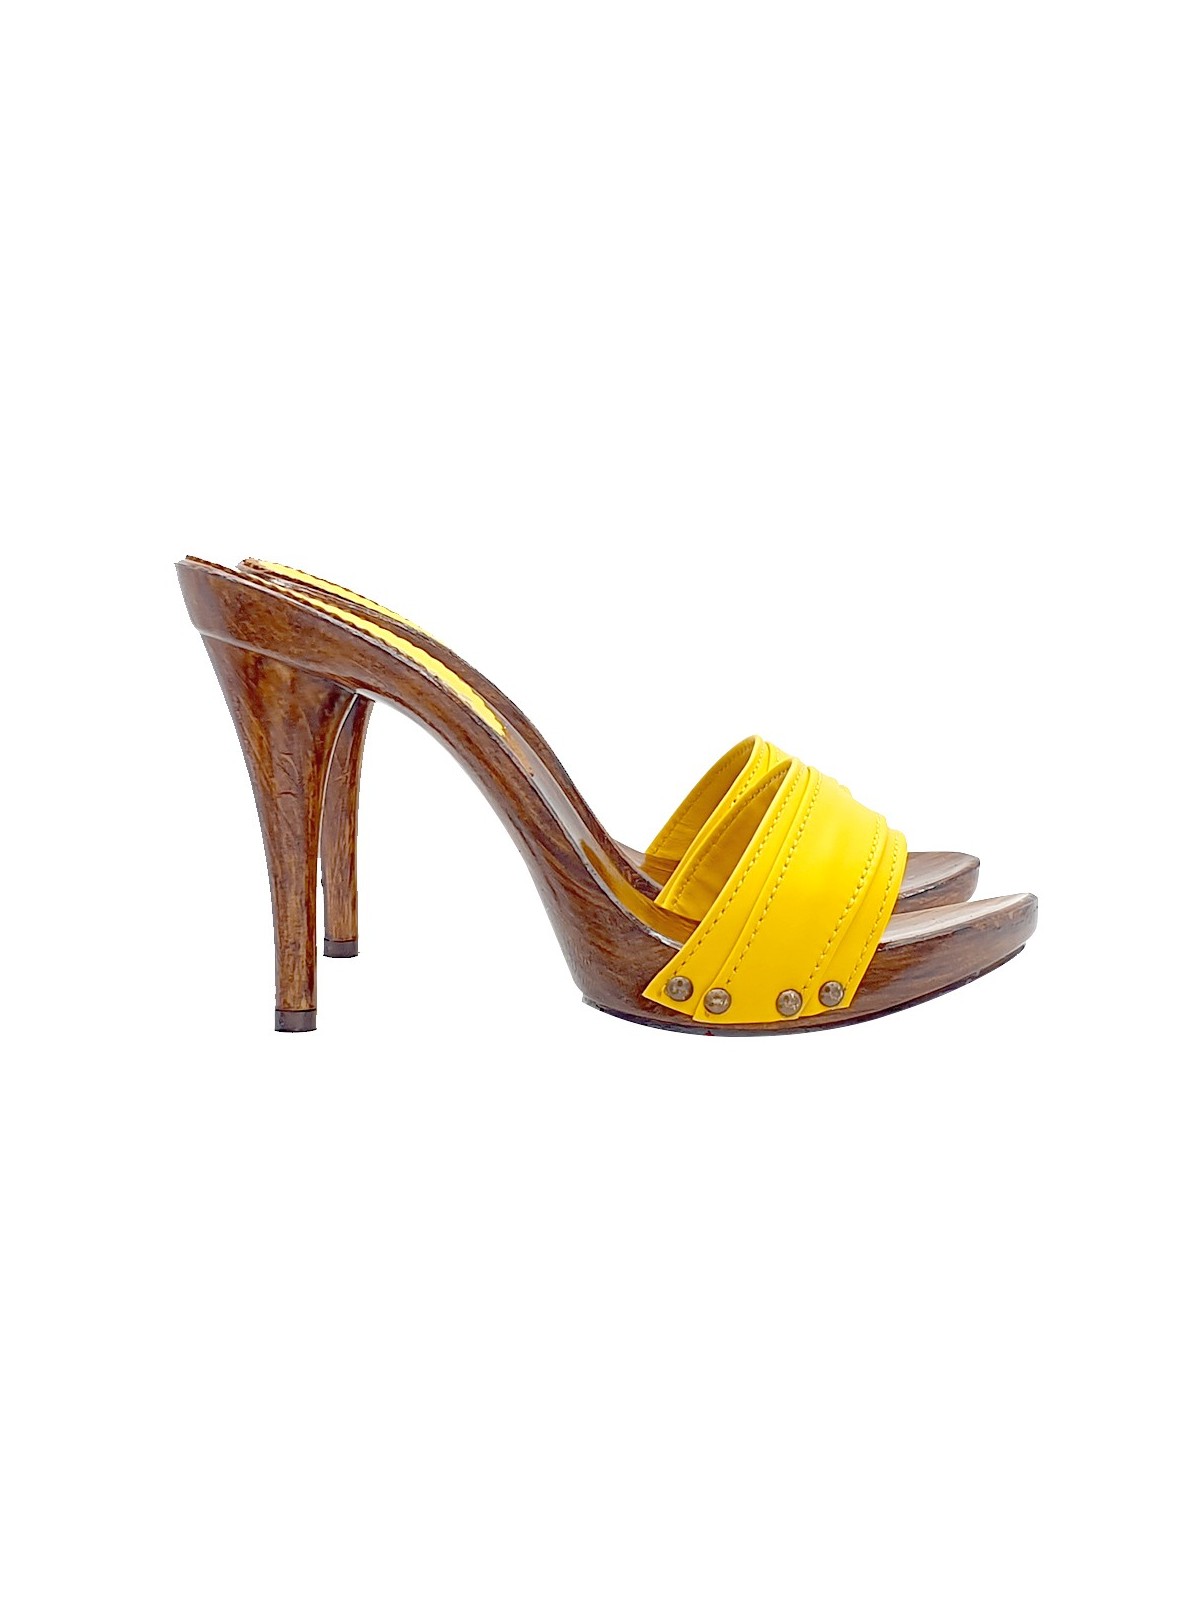 CLOGS IN YELLOW LEATHER AND HIGH HEEL